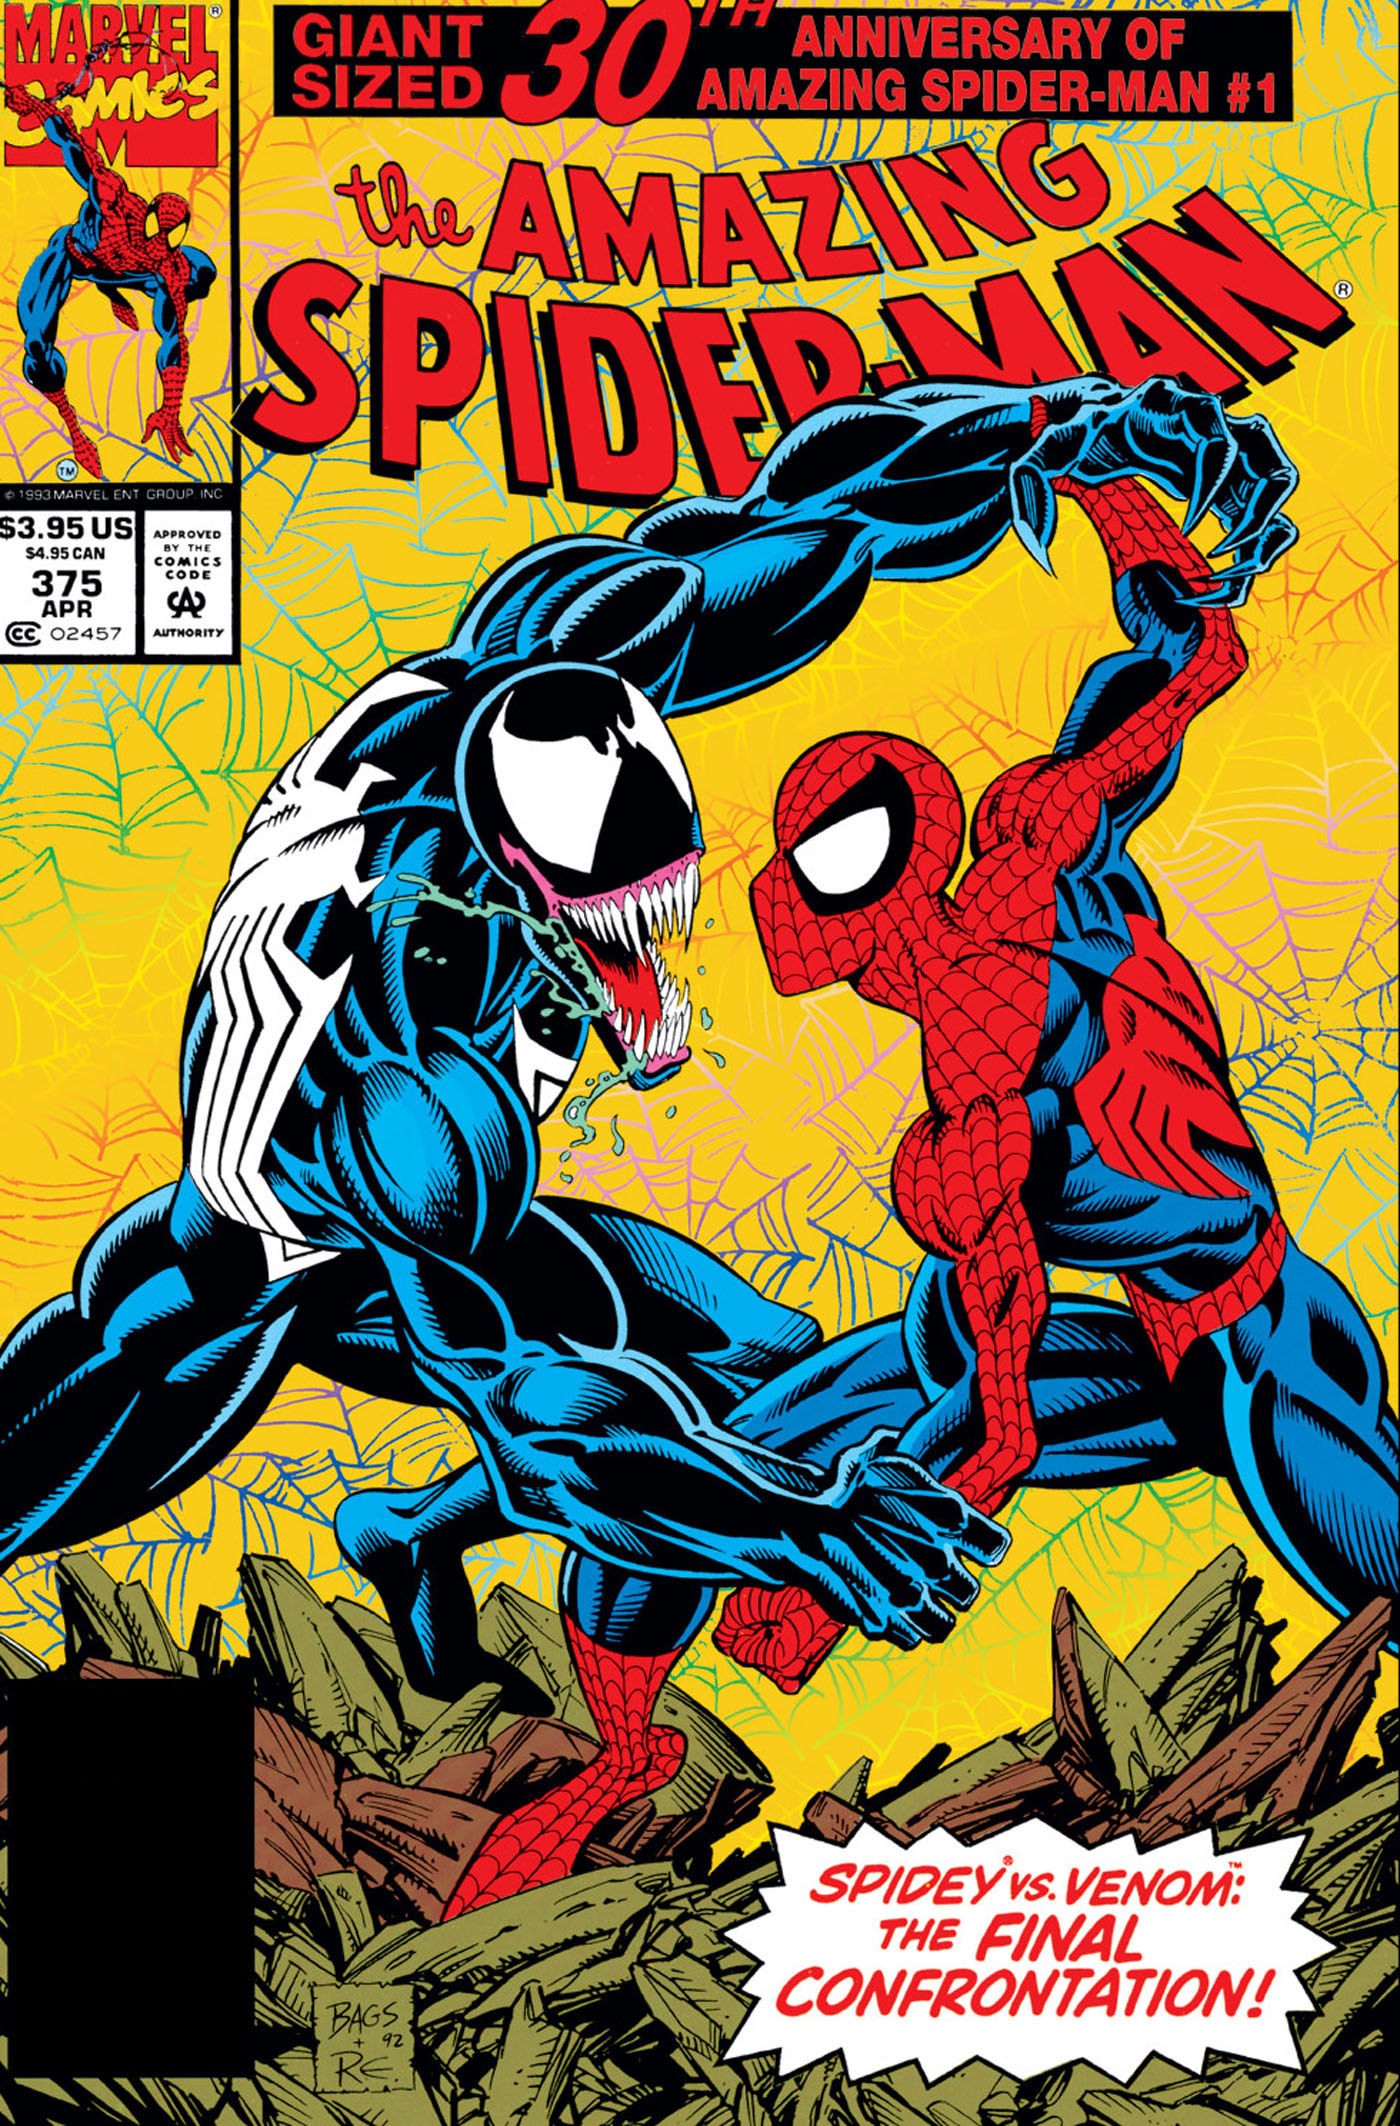 Cover of Amazing Spider-Man #375 by Mark Bagley. (Image: Marvel Comics)